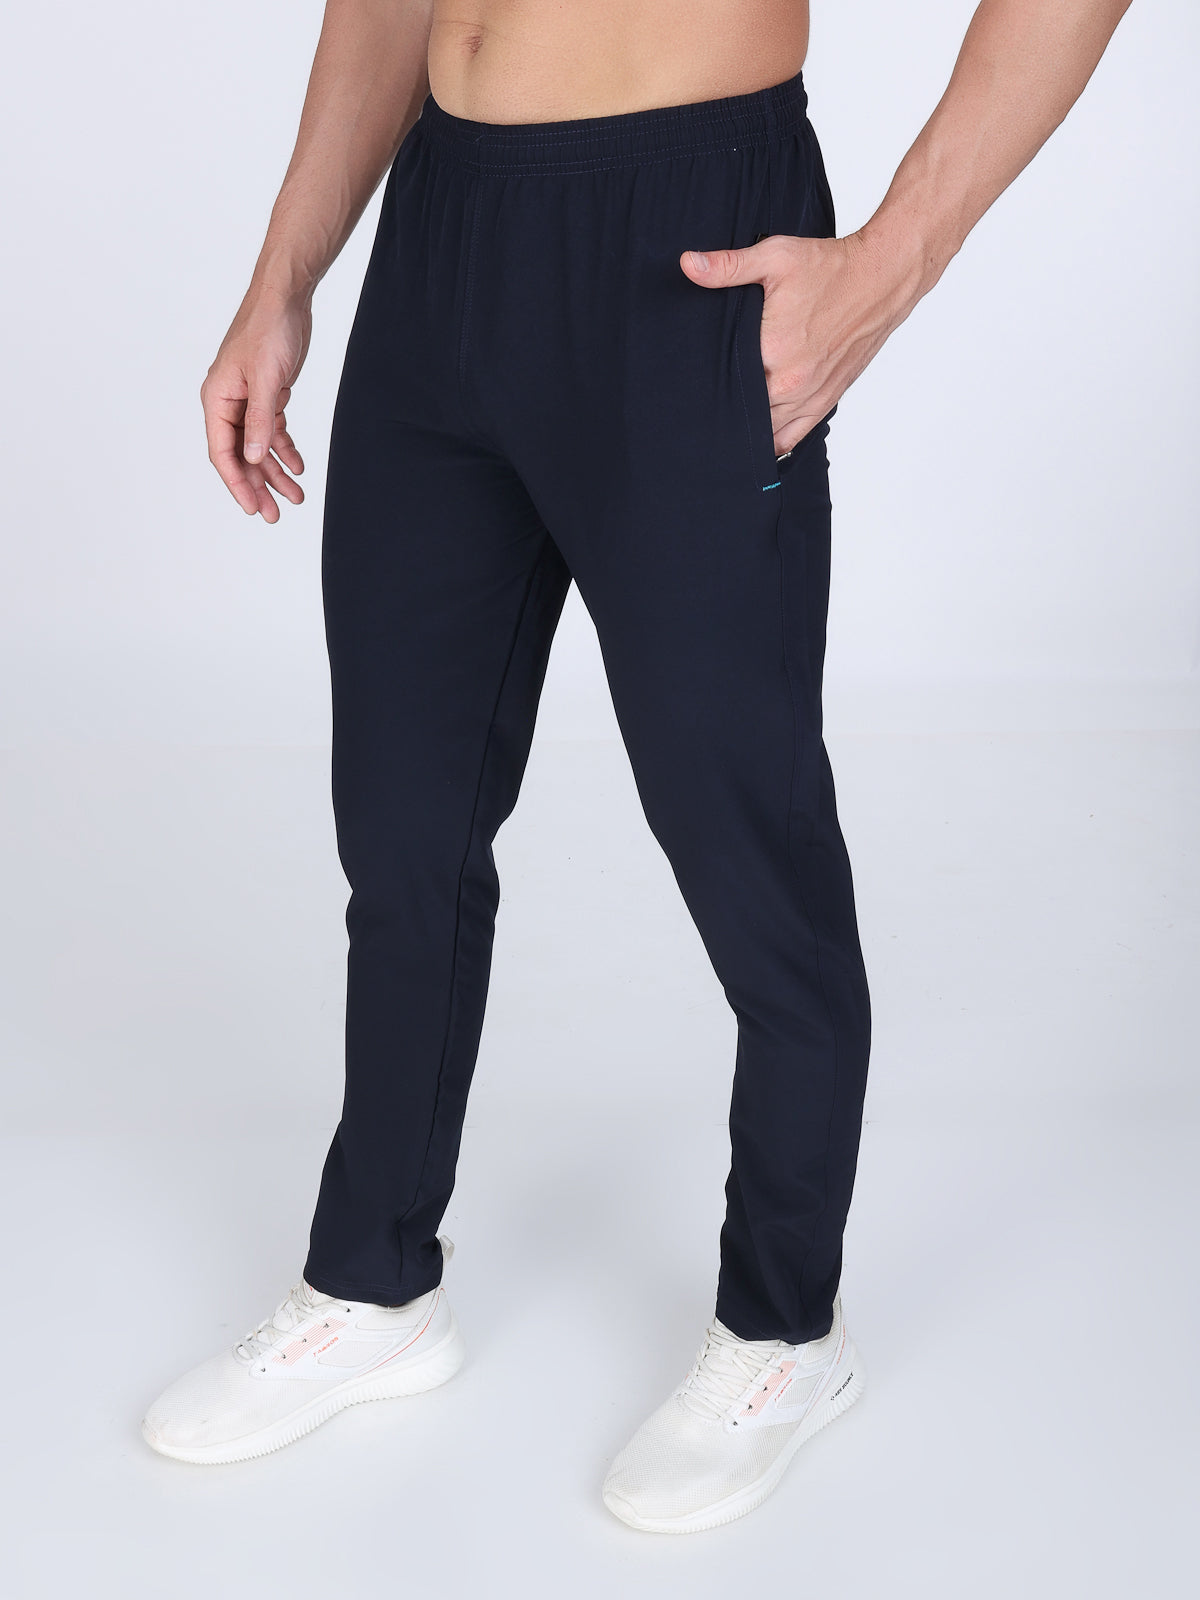 Four way Lycra Track pant in Rohtak at best price by Pfc Clothing Private  Limited - Justdial